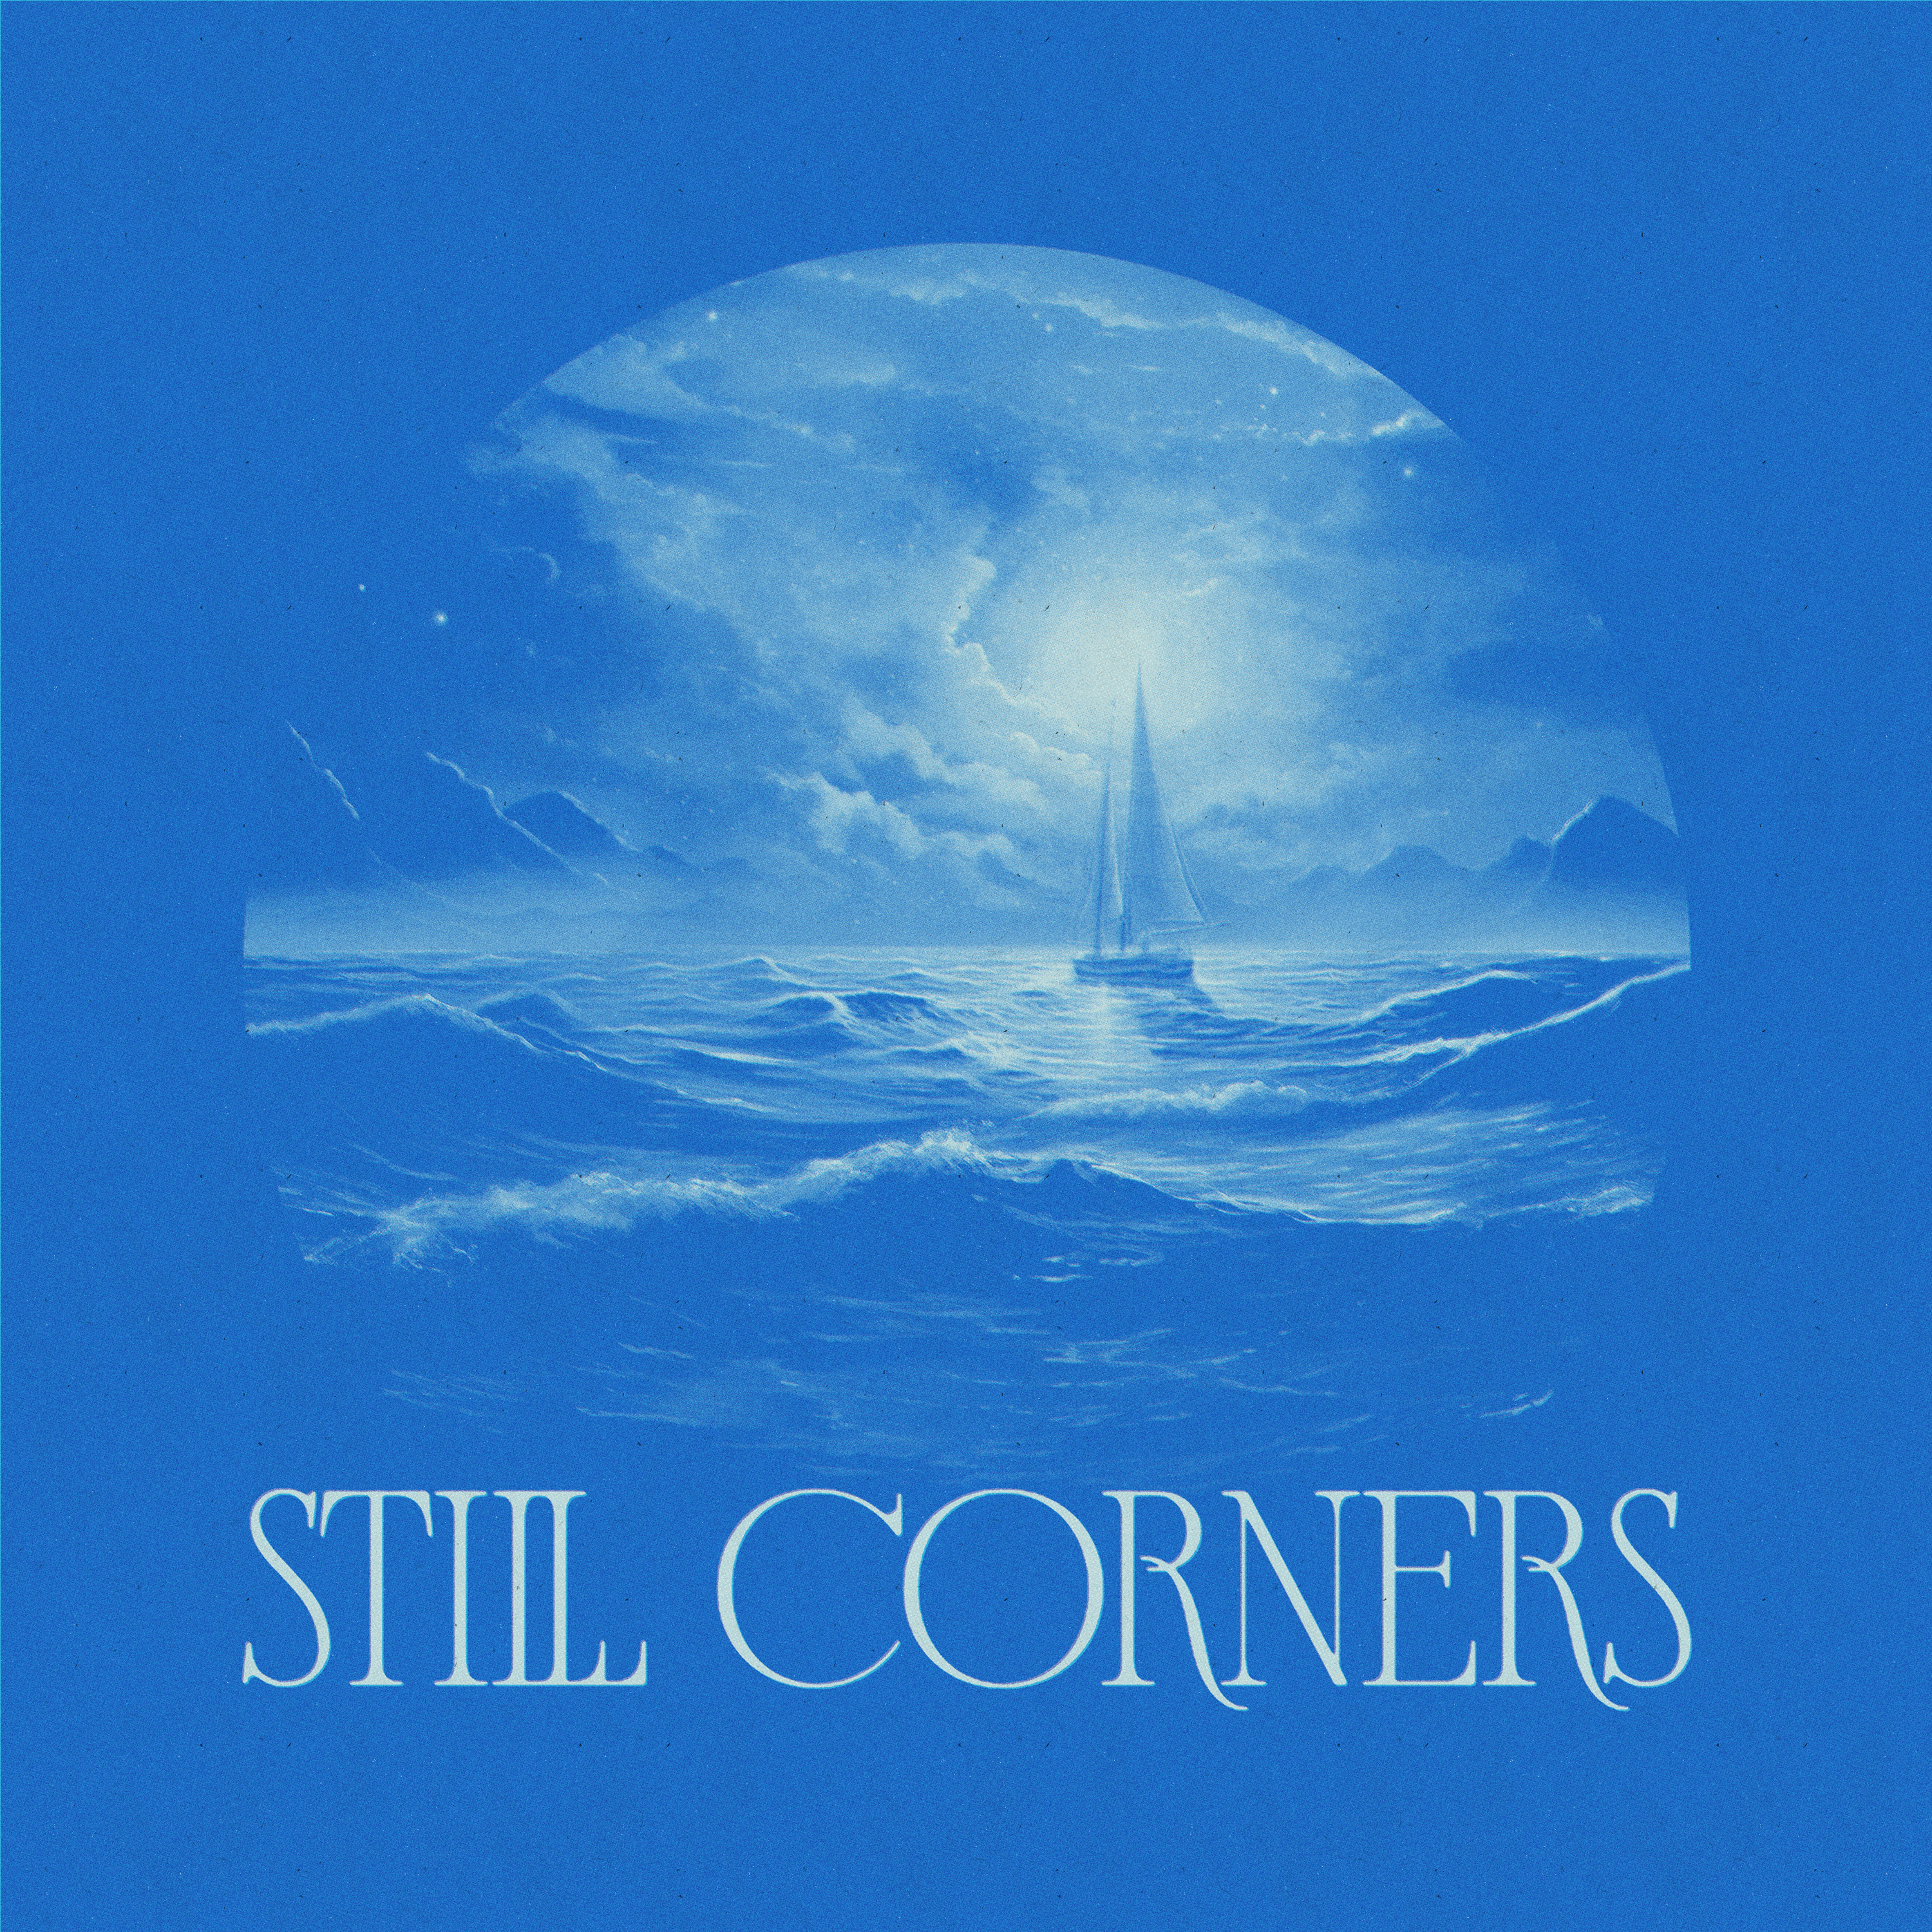 Artwork for 'Crystal Blue' by Still Corners